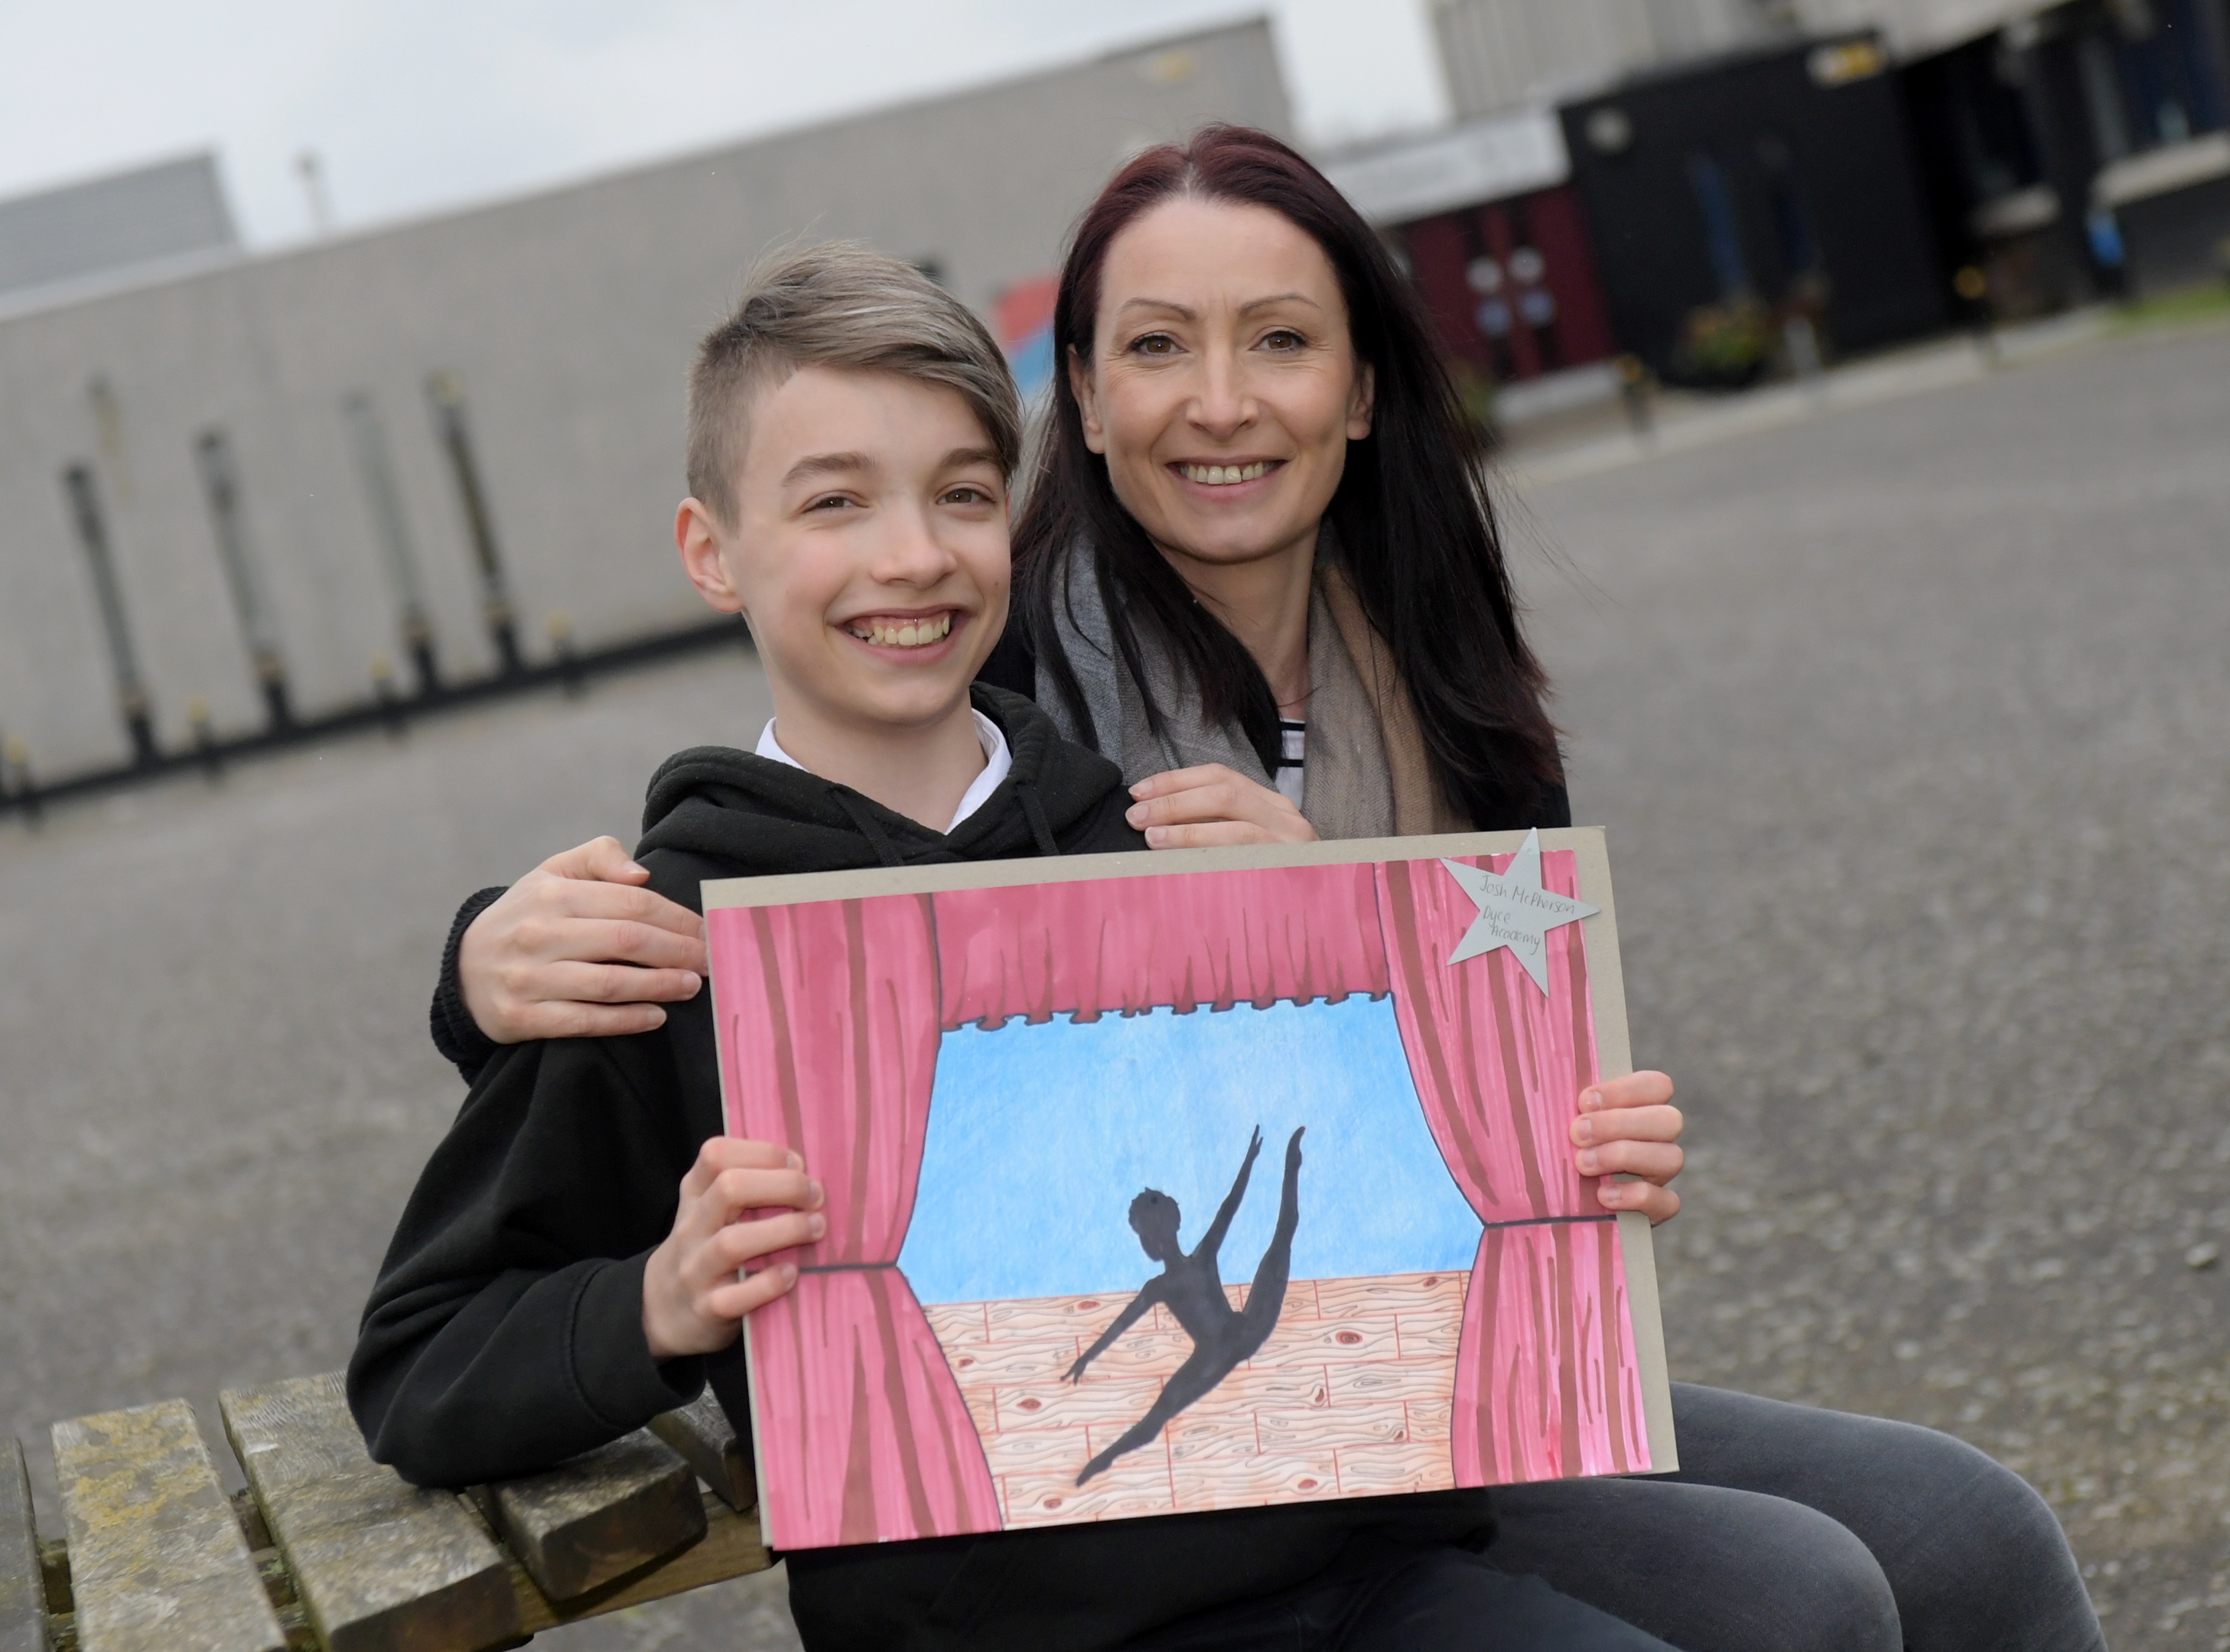 Dyce Academy pupil Josh McPherson's artwork is going to be showcased in the Scottish Parliament this June. He is pictured with his mum Catherine McPherson.
Picture by Kath Flannery.